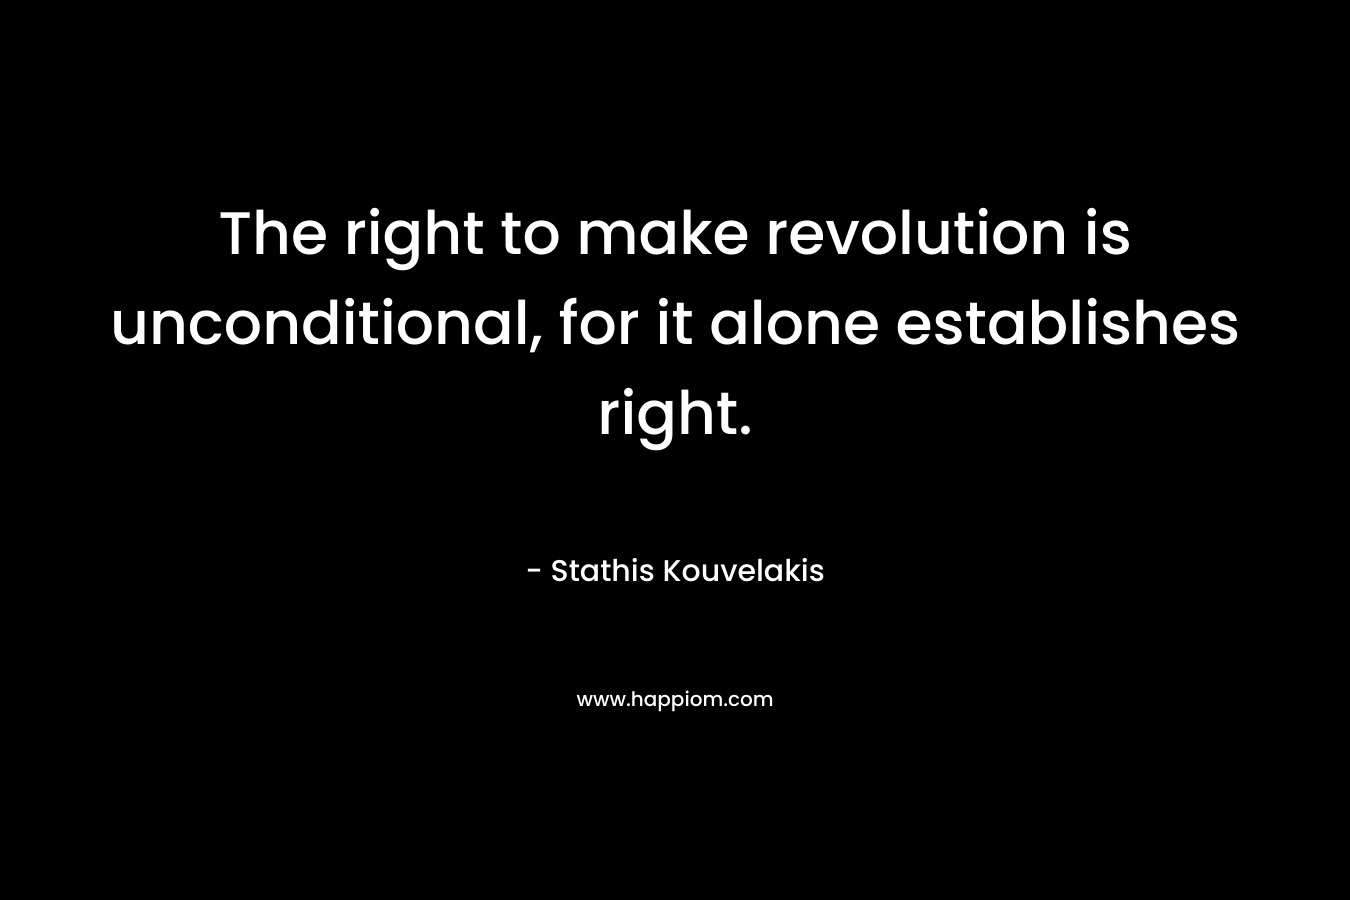 The right to make revolution is unconditional, for it alone establishes right. – Stathis Kouvelakis